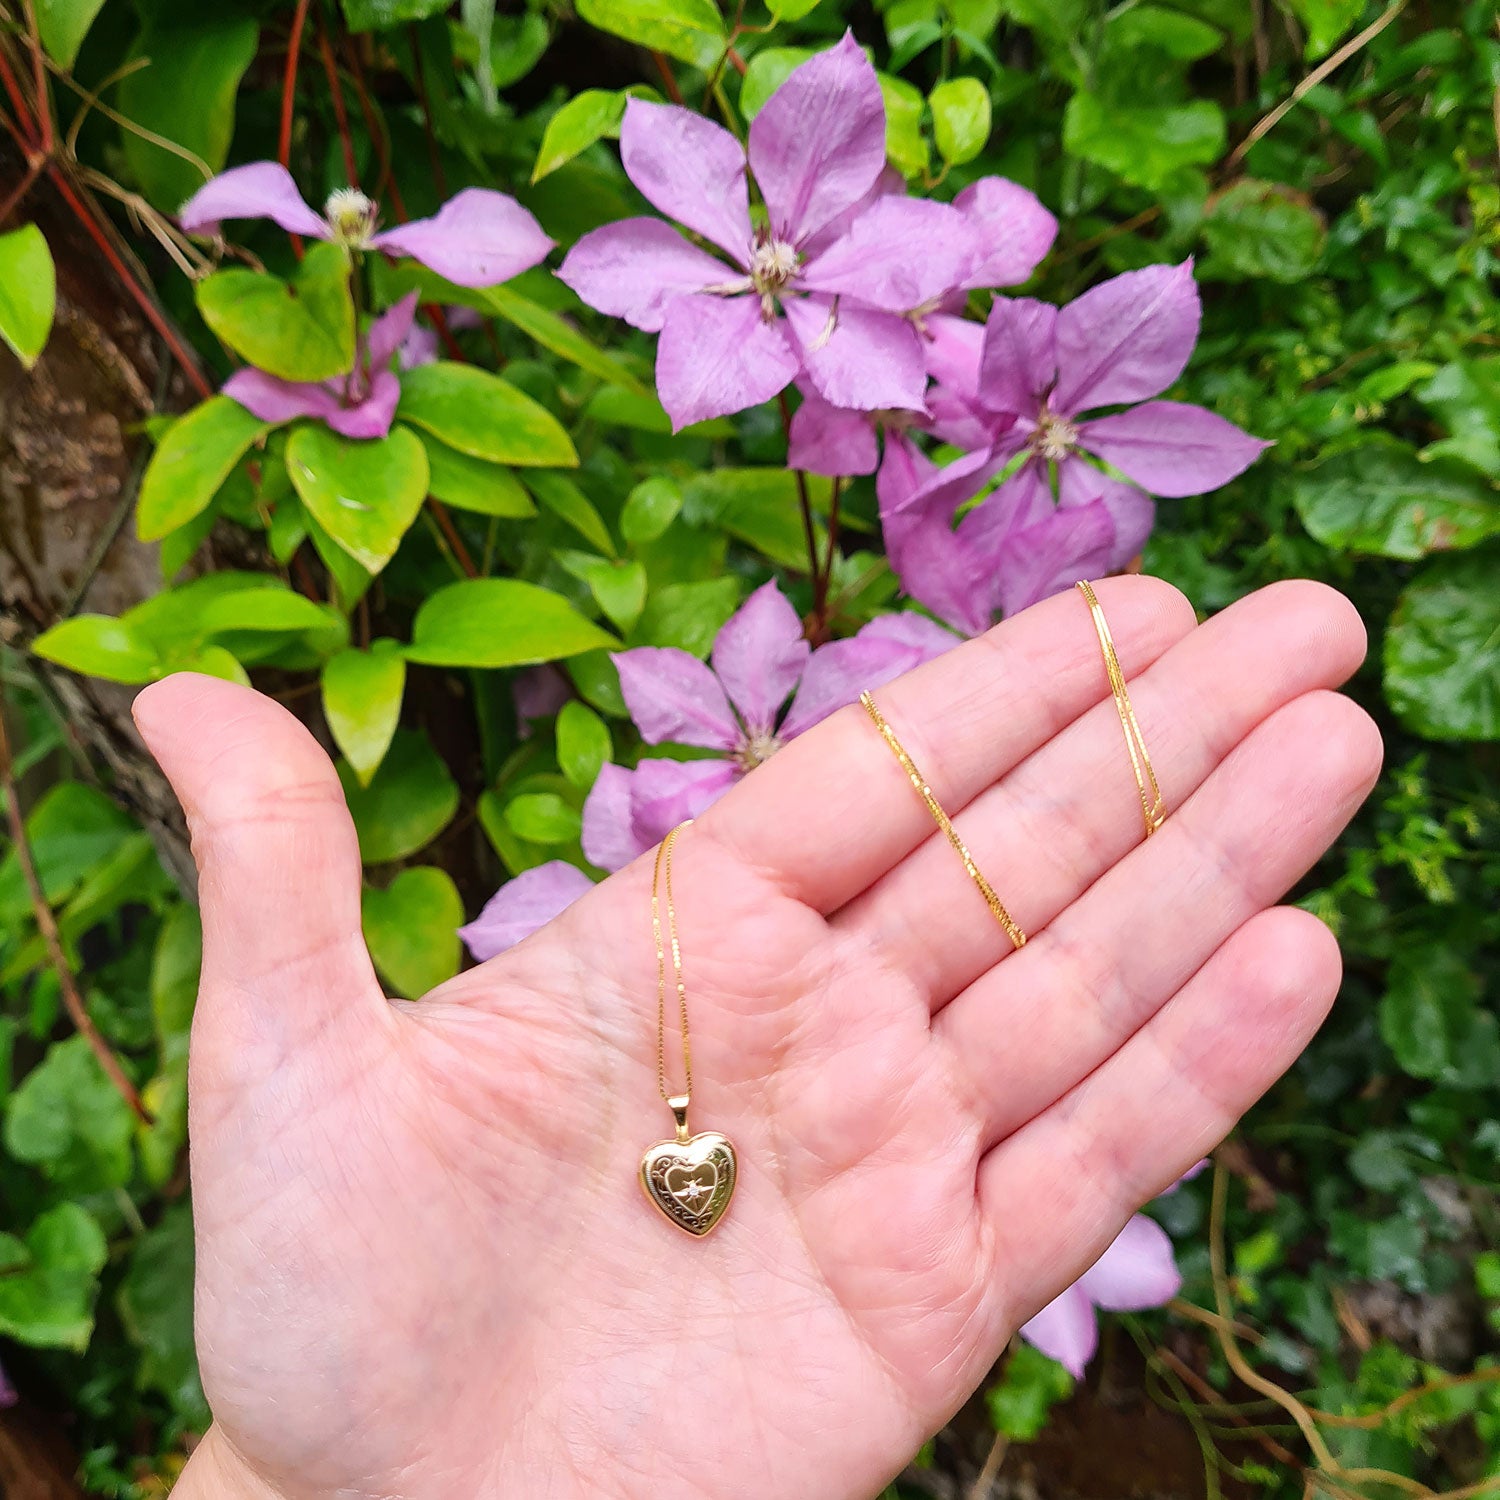 small gold heart locket in hand for scale